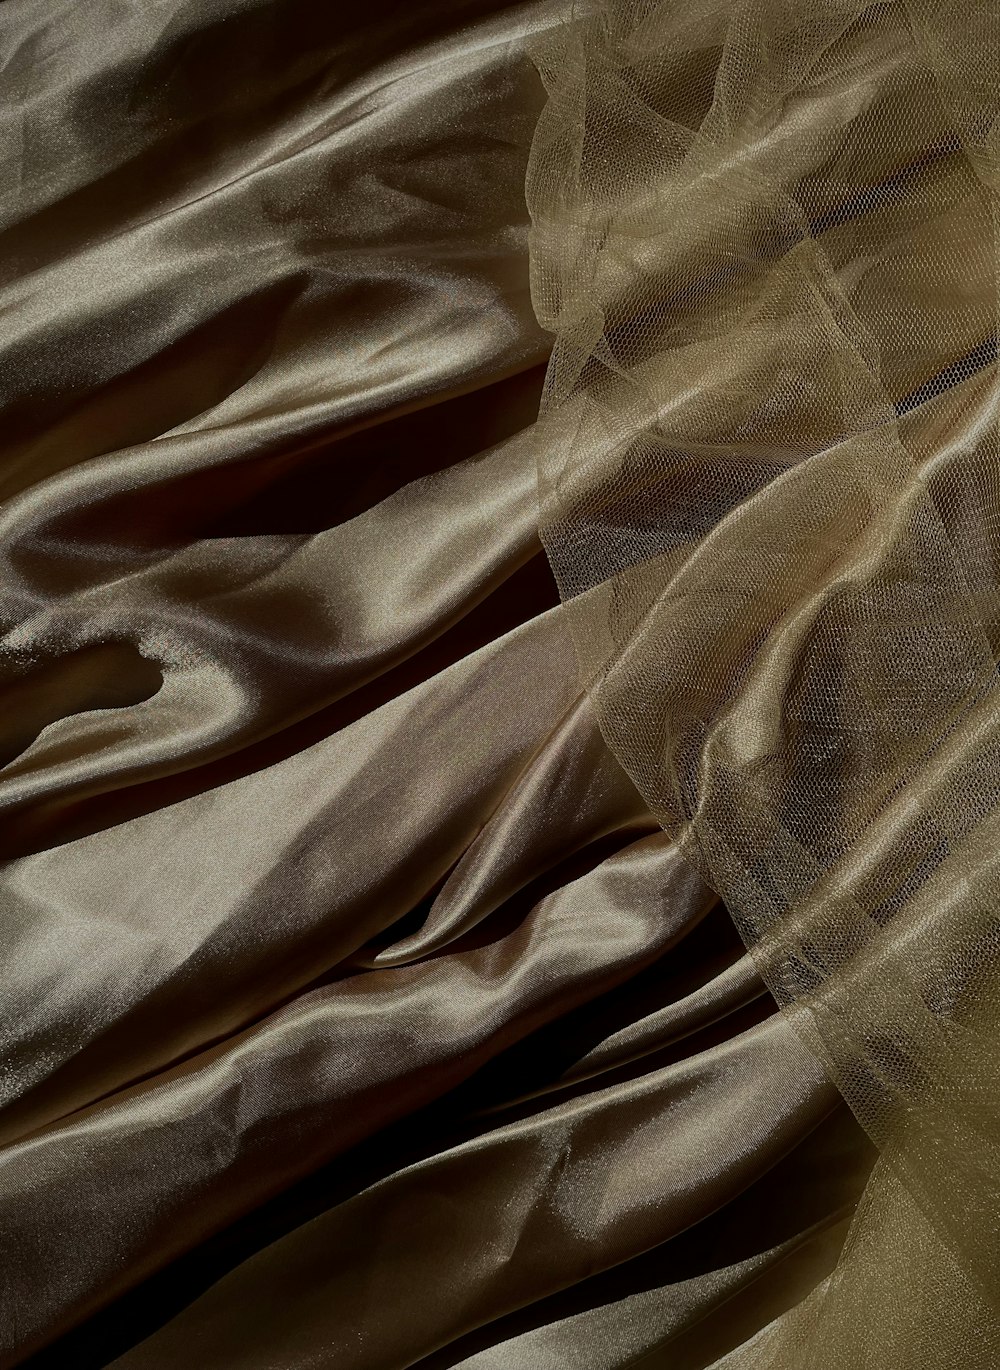 a close up view of a sheer fabric